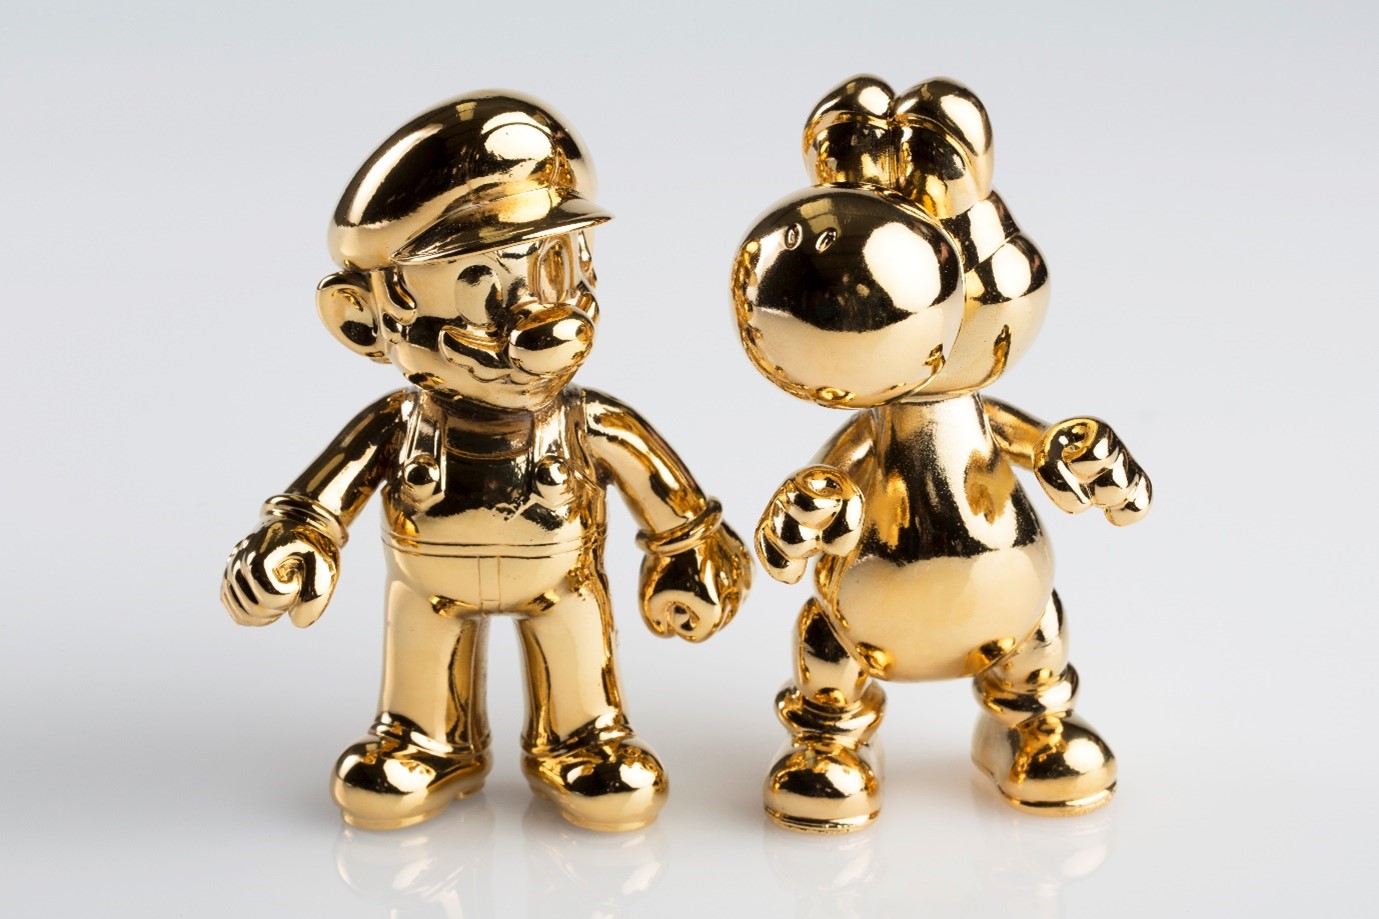 Electroformed and gold plated Super Mario and Yoshi plastic toys